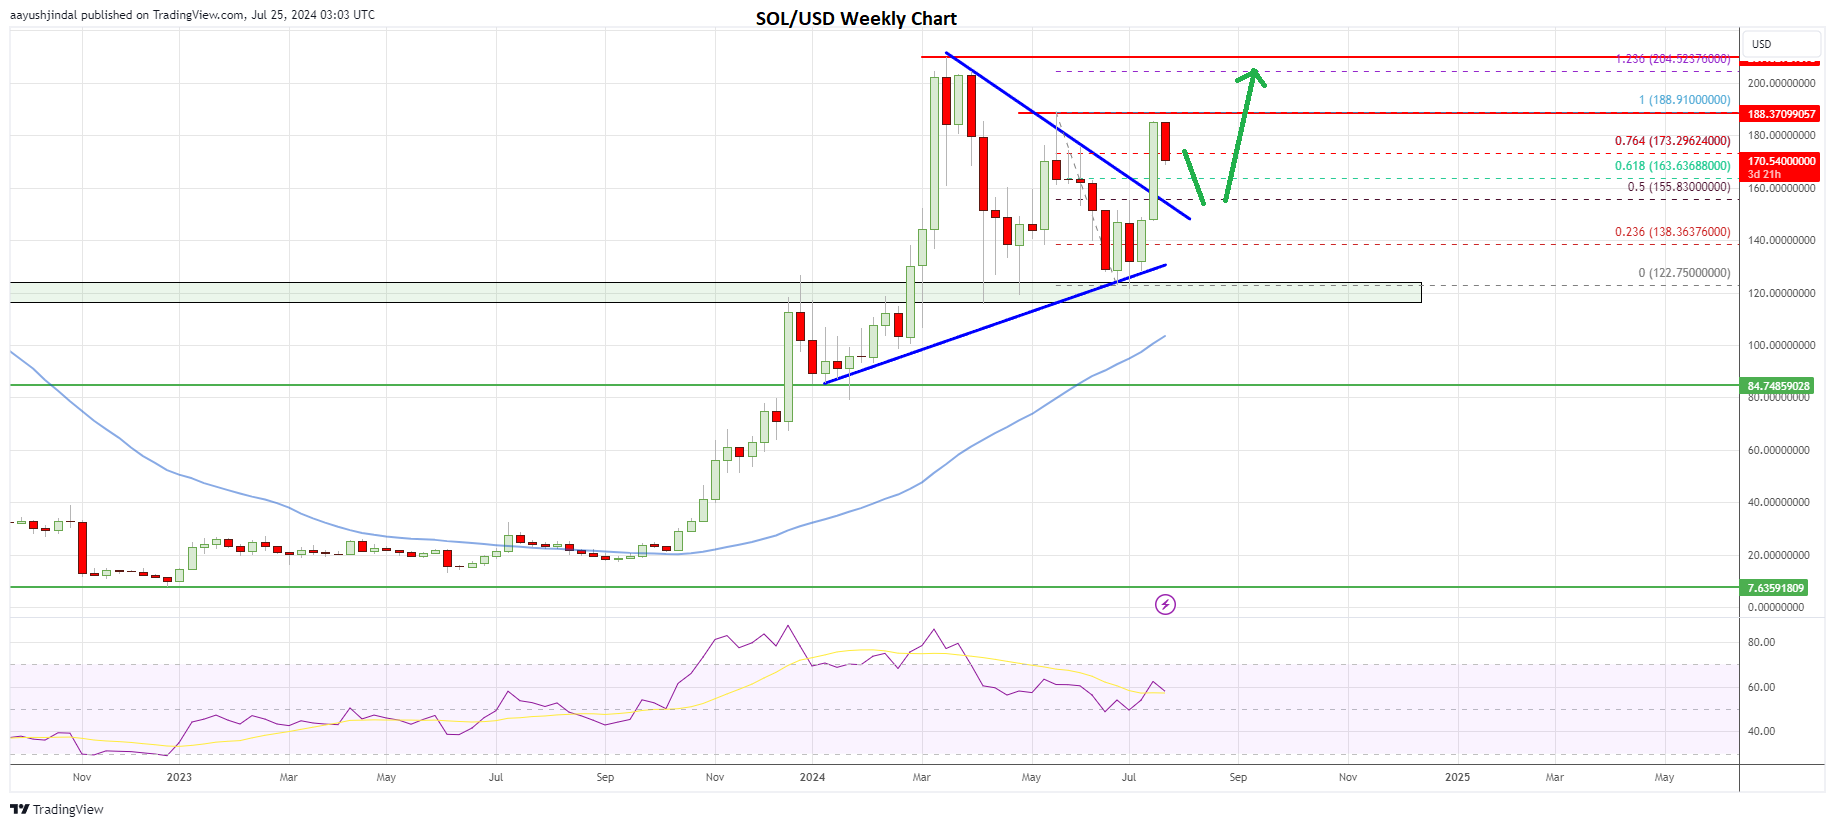 Solana price weekly chart | Source: SOL/USD on TradingView.com